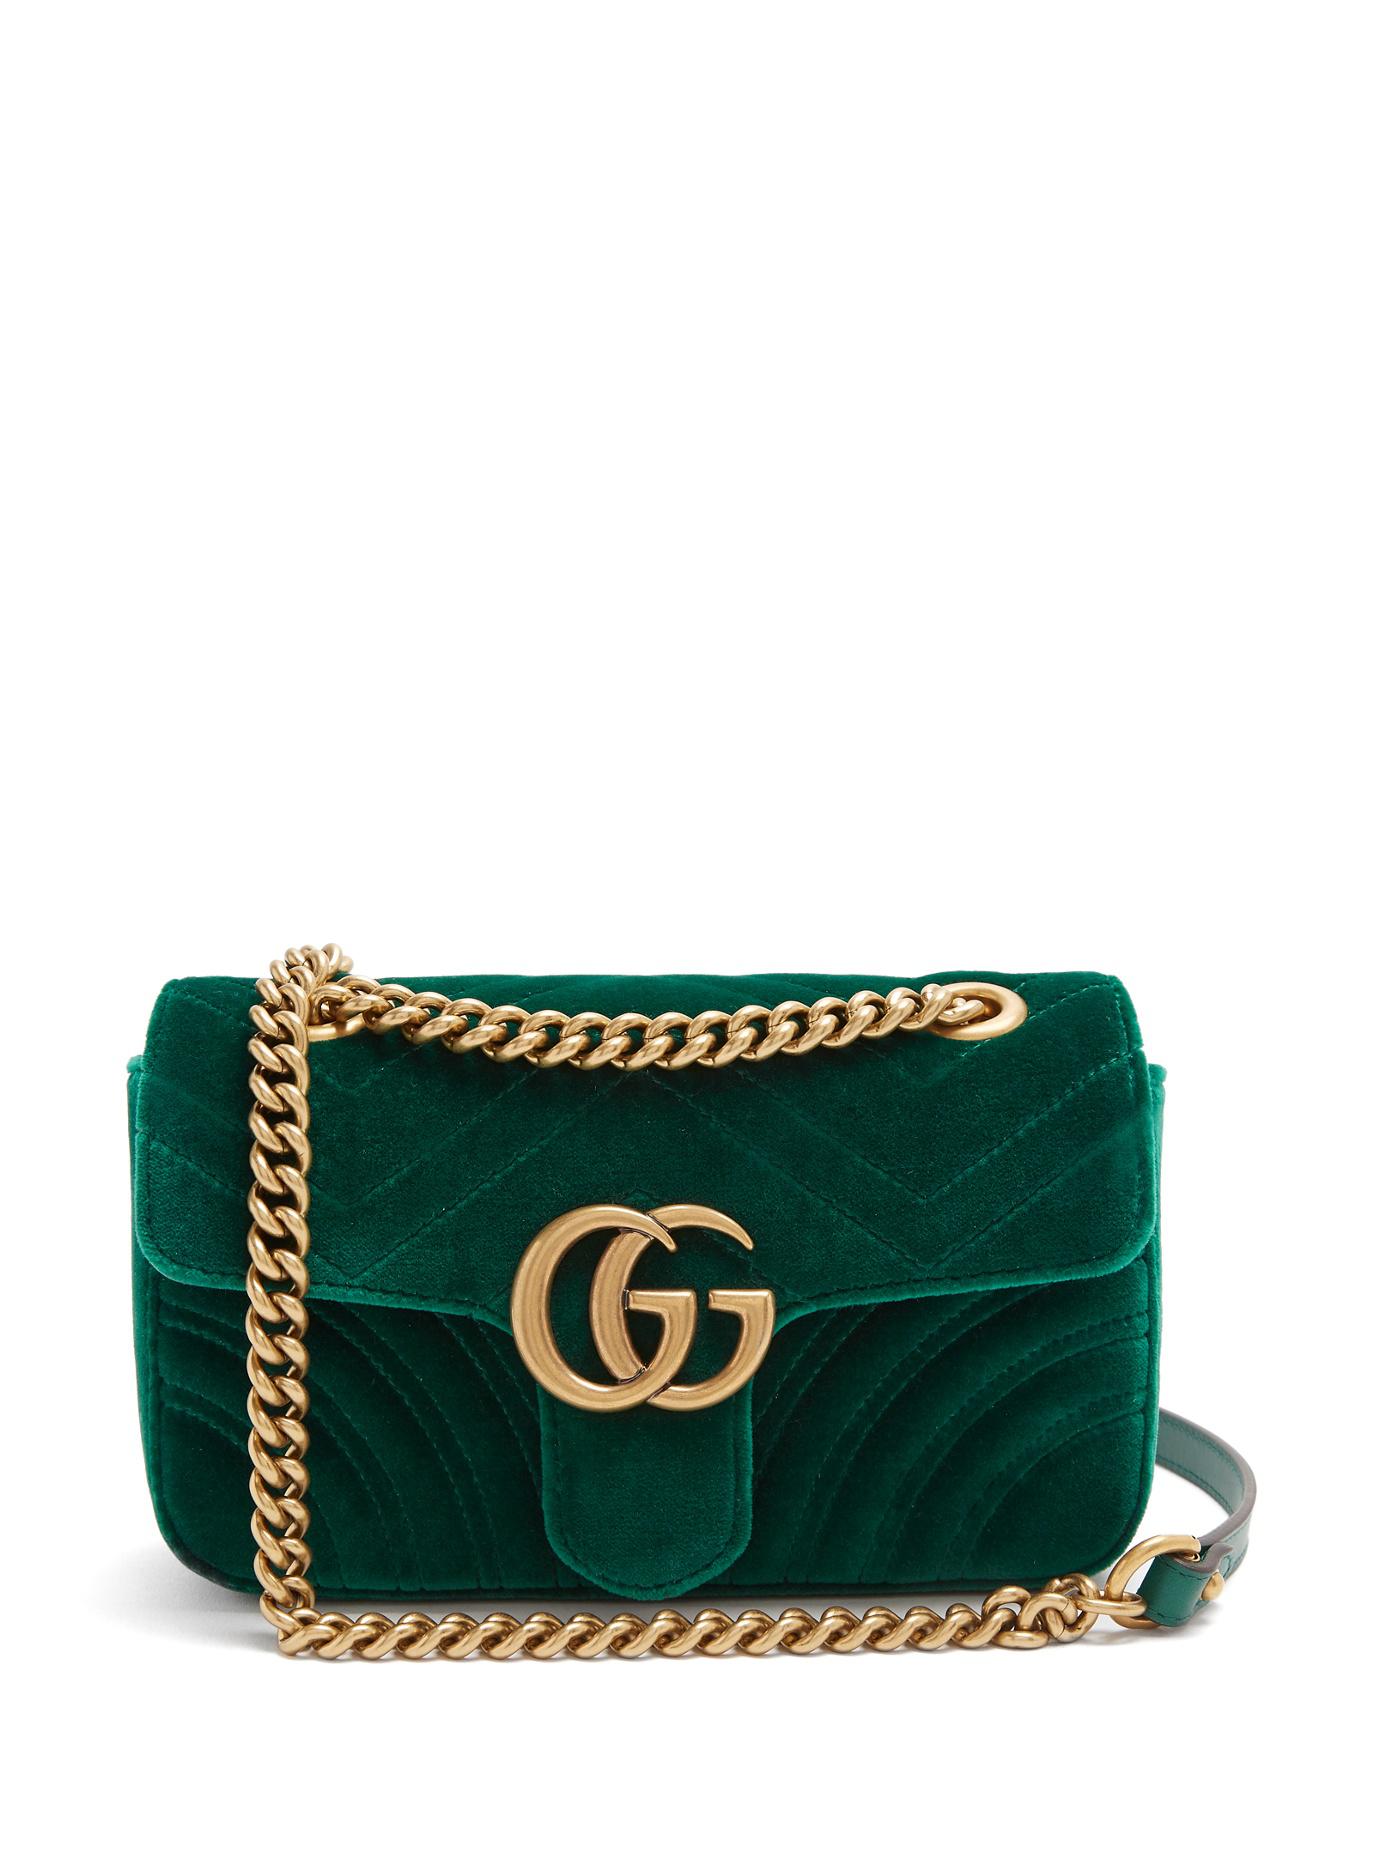 Gucci Gg Marmont Mini Quilted-velvet Cross-body Bag in Green - Lyst